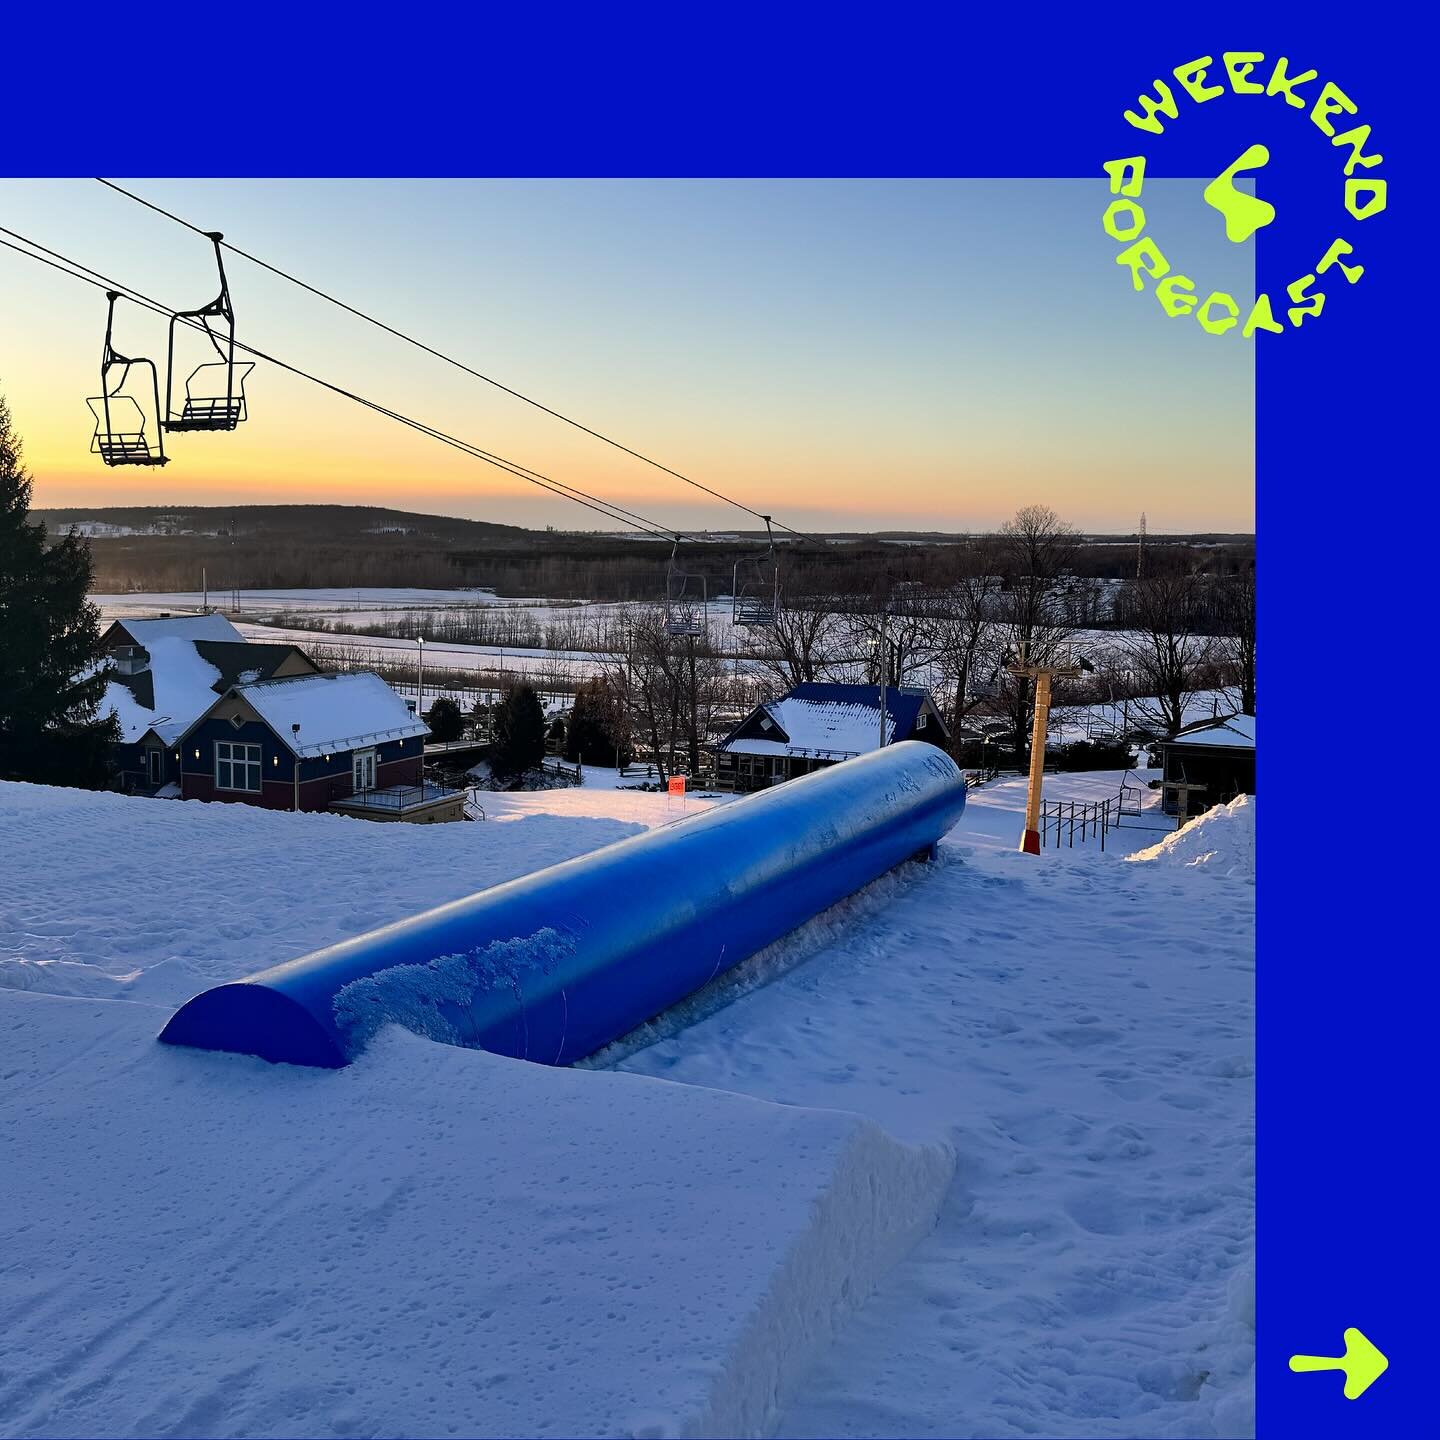 Weekend forecast #4:

At @montgleason, 4 terrain parks will be ready on Sunday afternoon with 4 jumps and 17 features for all levels. 

The terrain park at Victoriaville is fully open with an addition of 2 slides for kids. 

Enjoy ! 😽